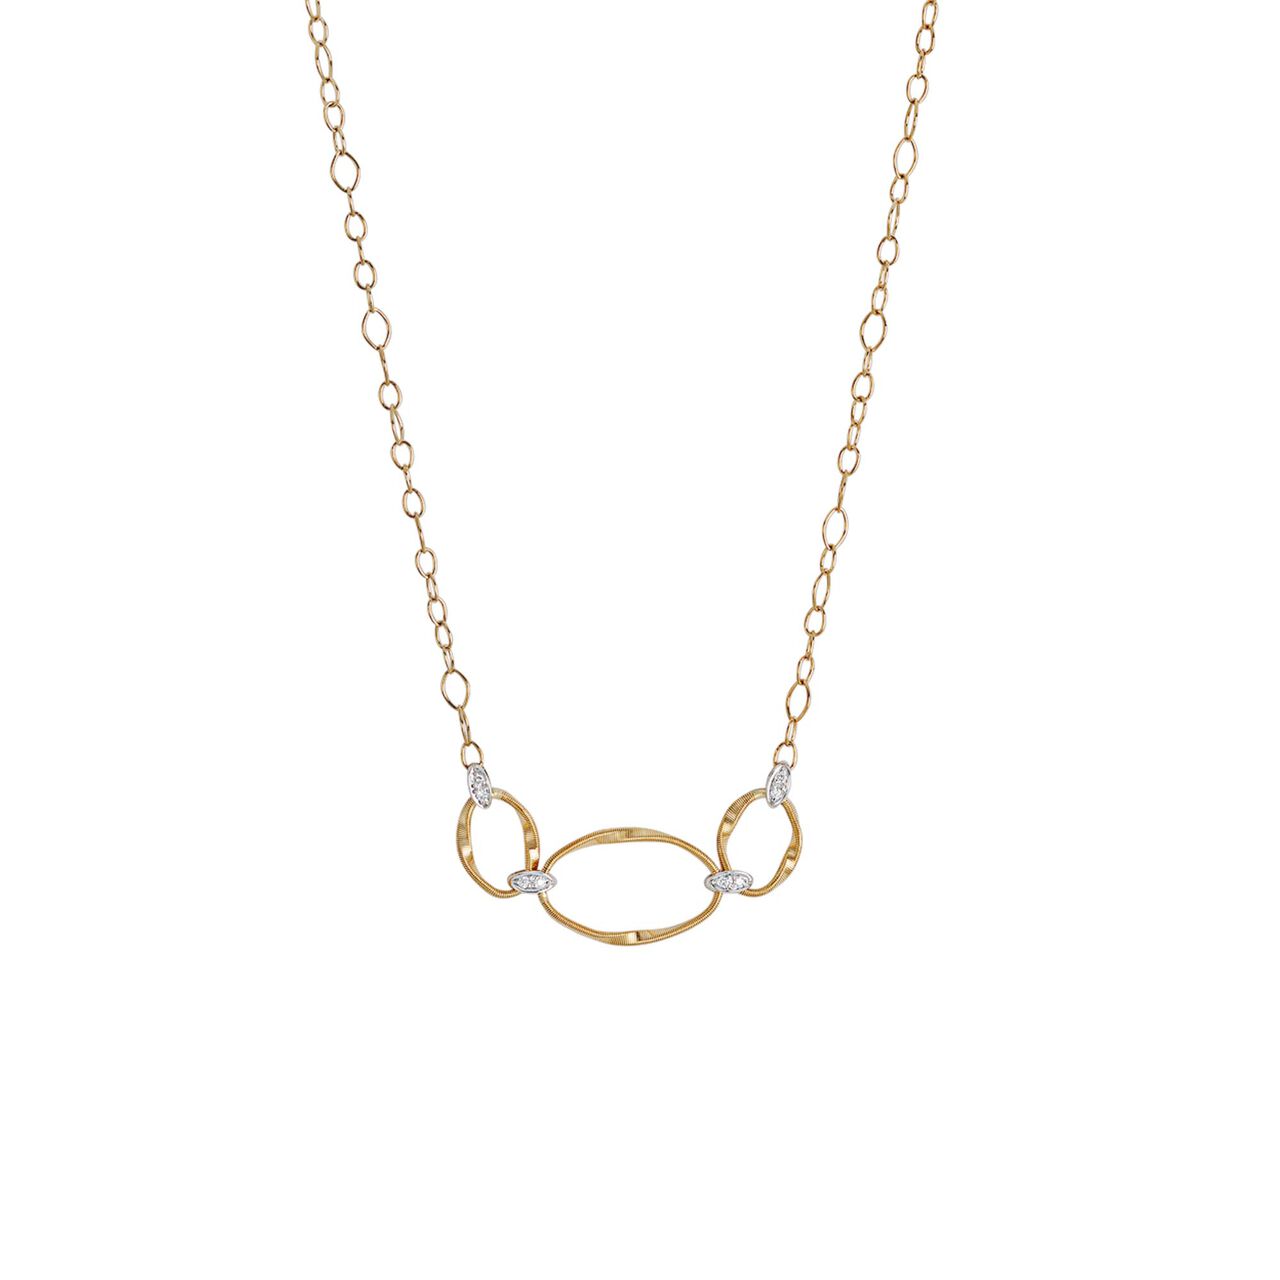 maison birks marco bicego marrakech onde yellow gold and diamond coil chain necklace cg771 b2yw image number 0